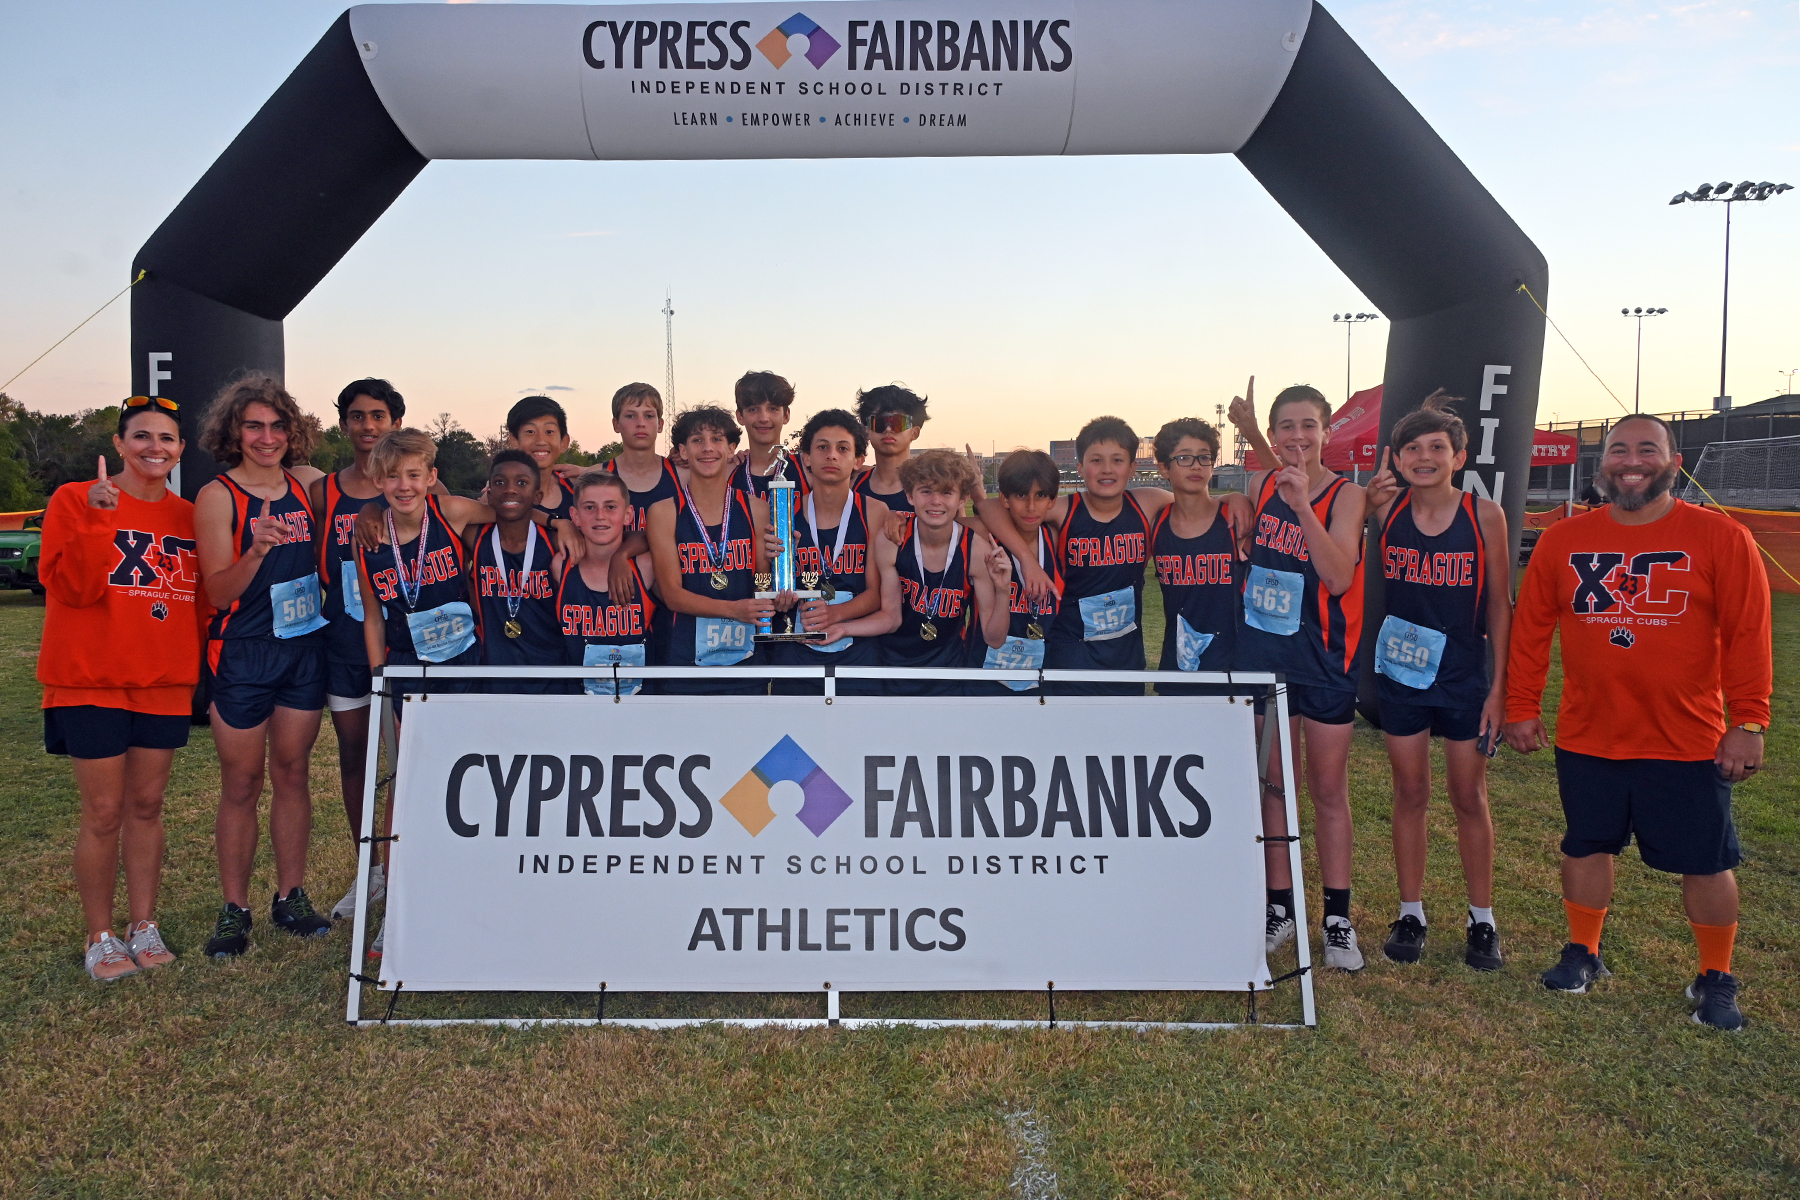 Anthony, Salyards, Sprague Win District Middle School Cross Country Team Titles 